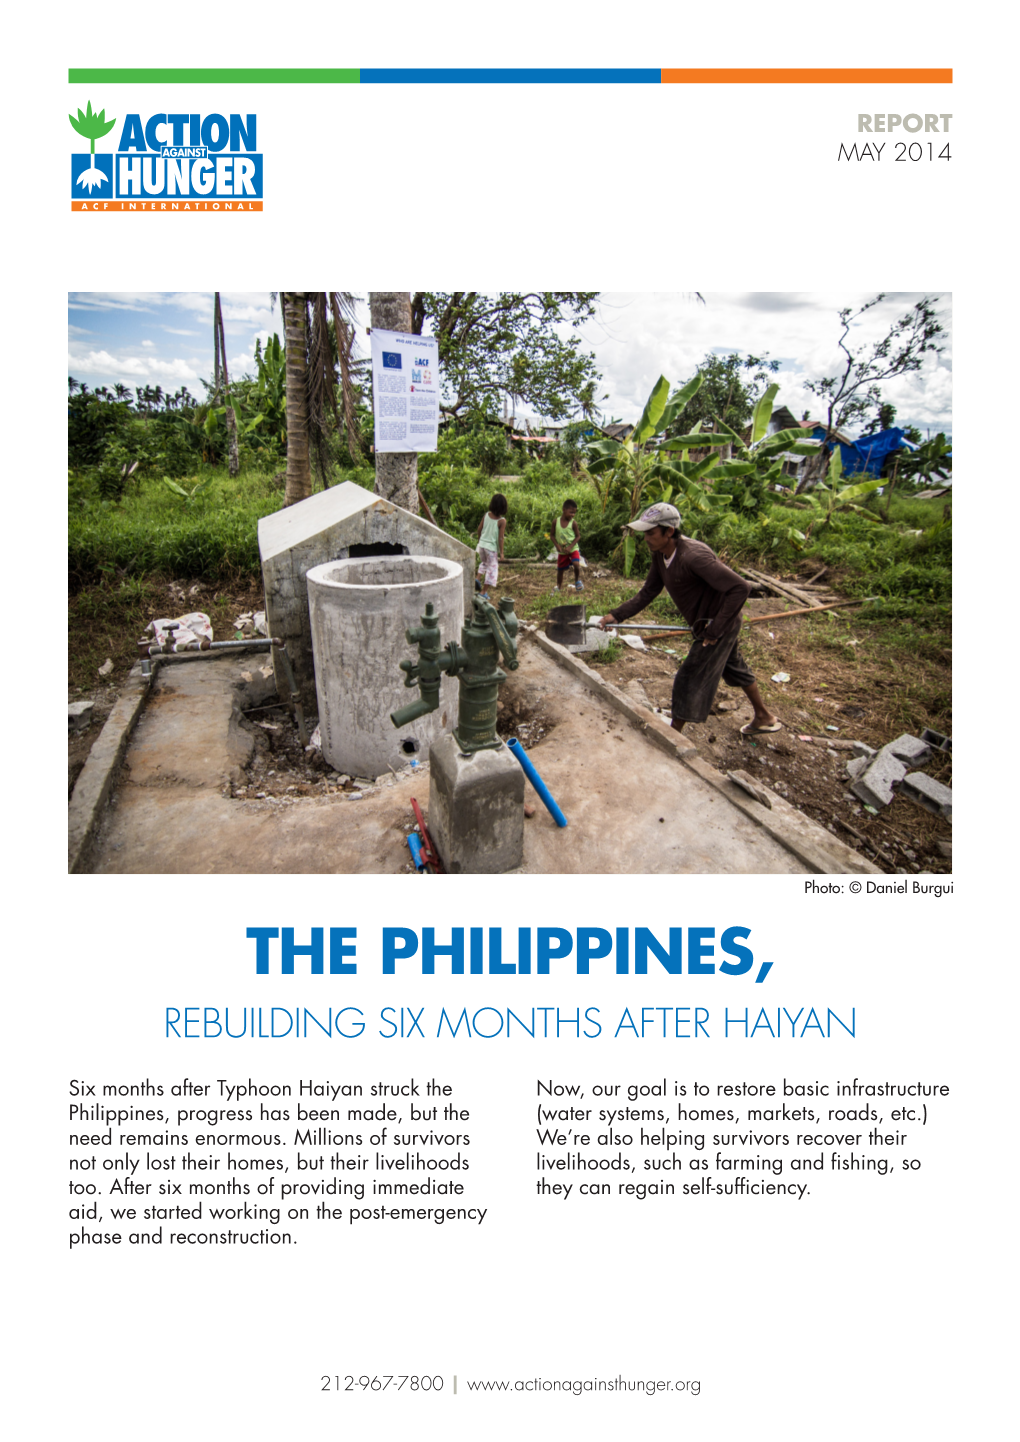 The Philippines, Rebuilding Six Months After Haiyan